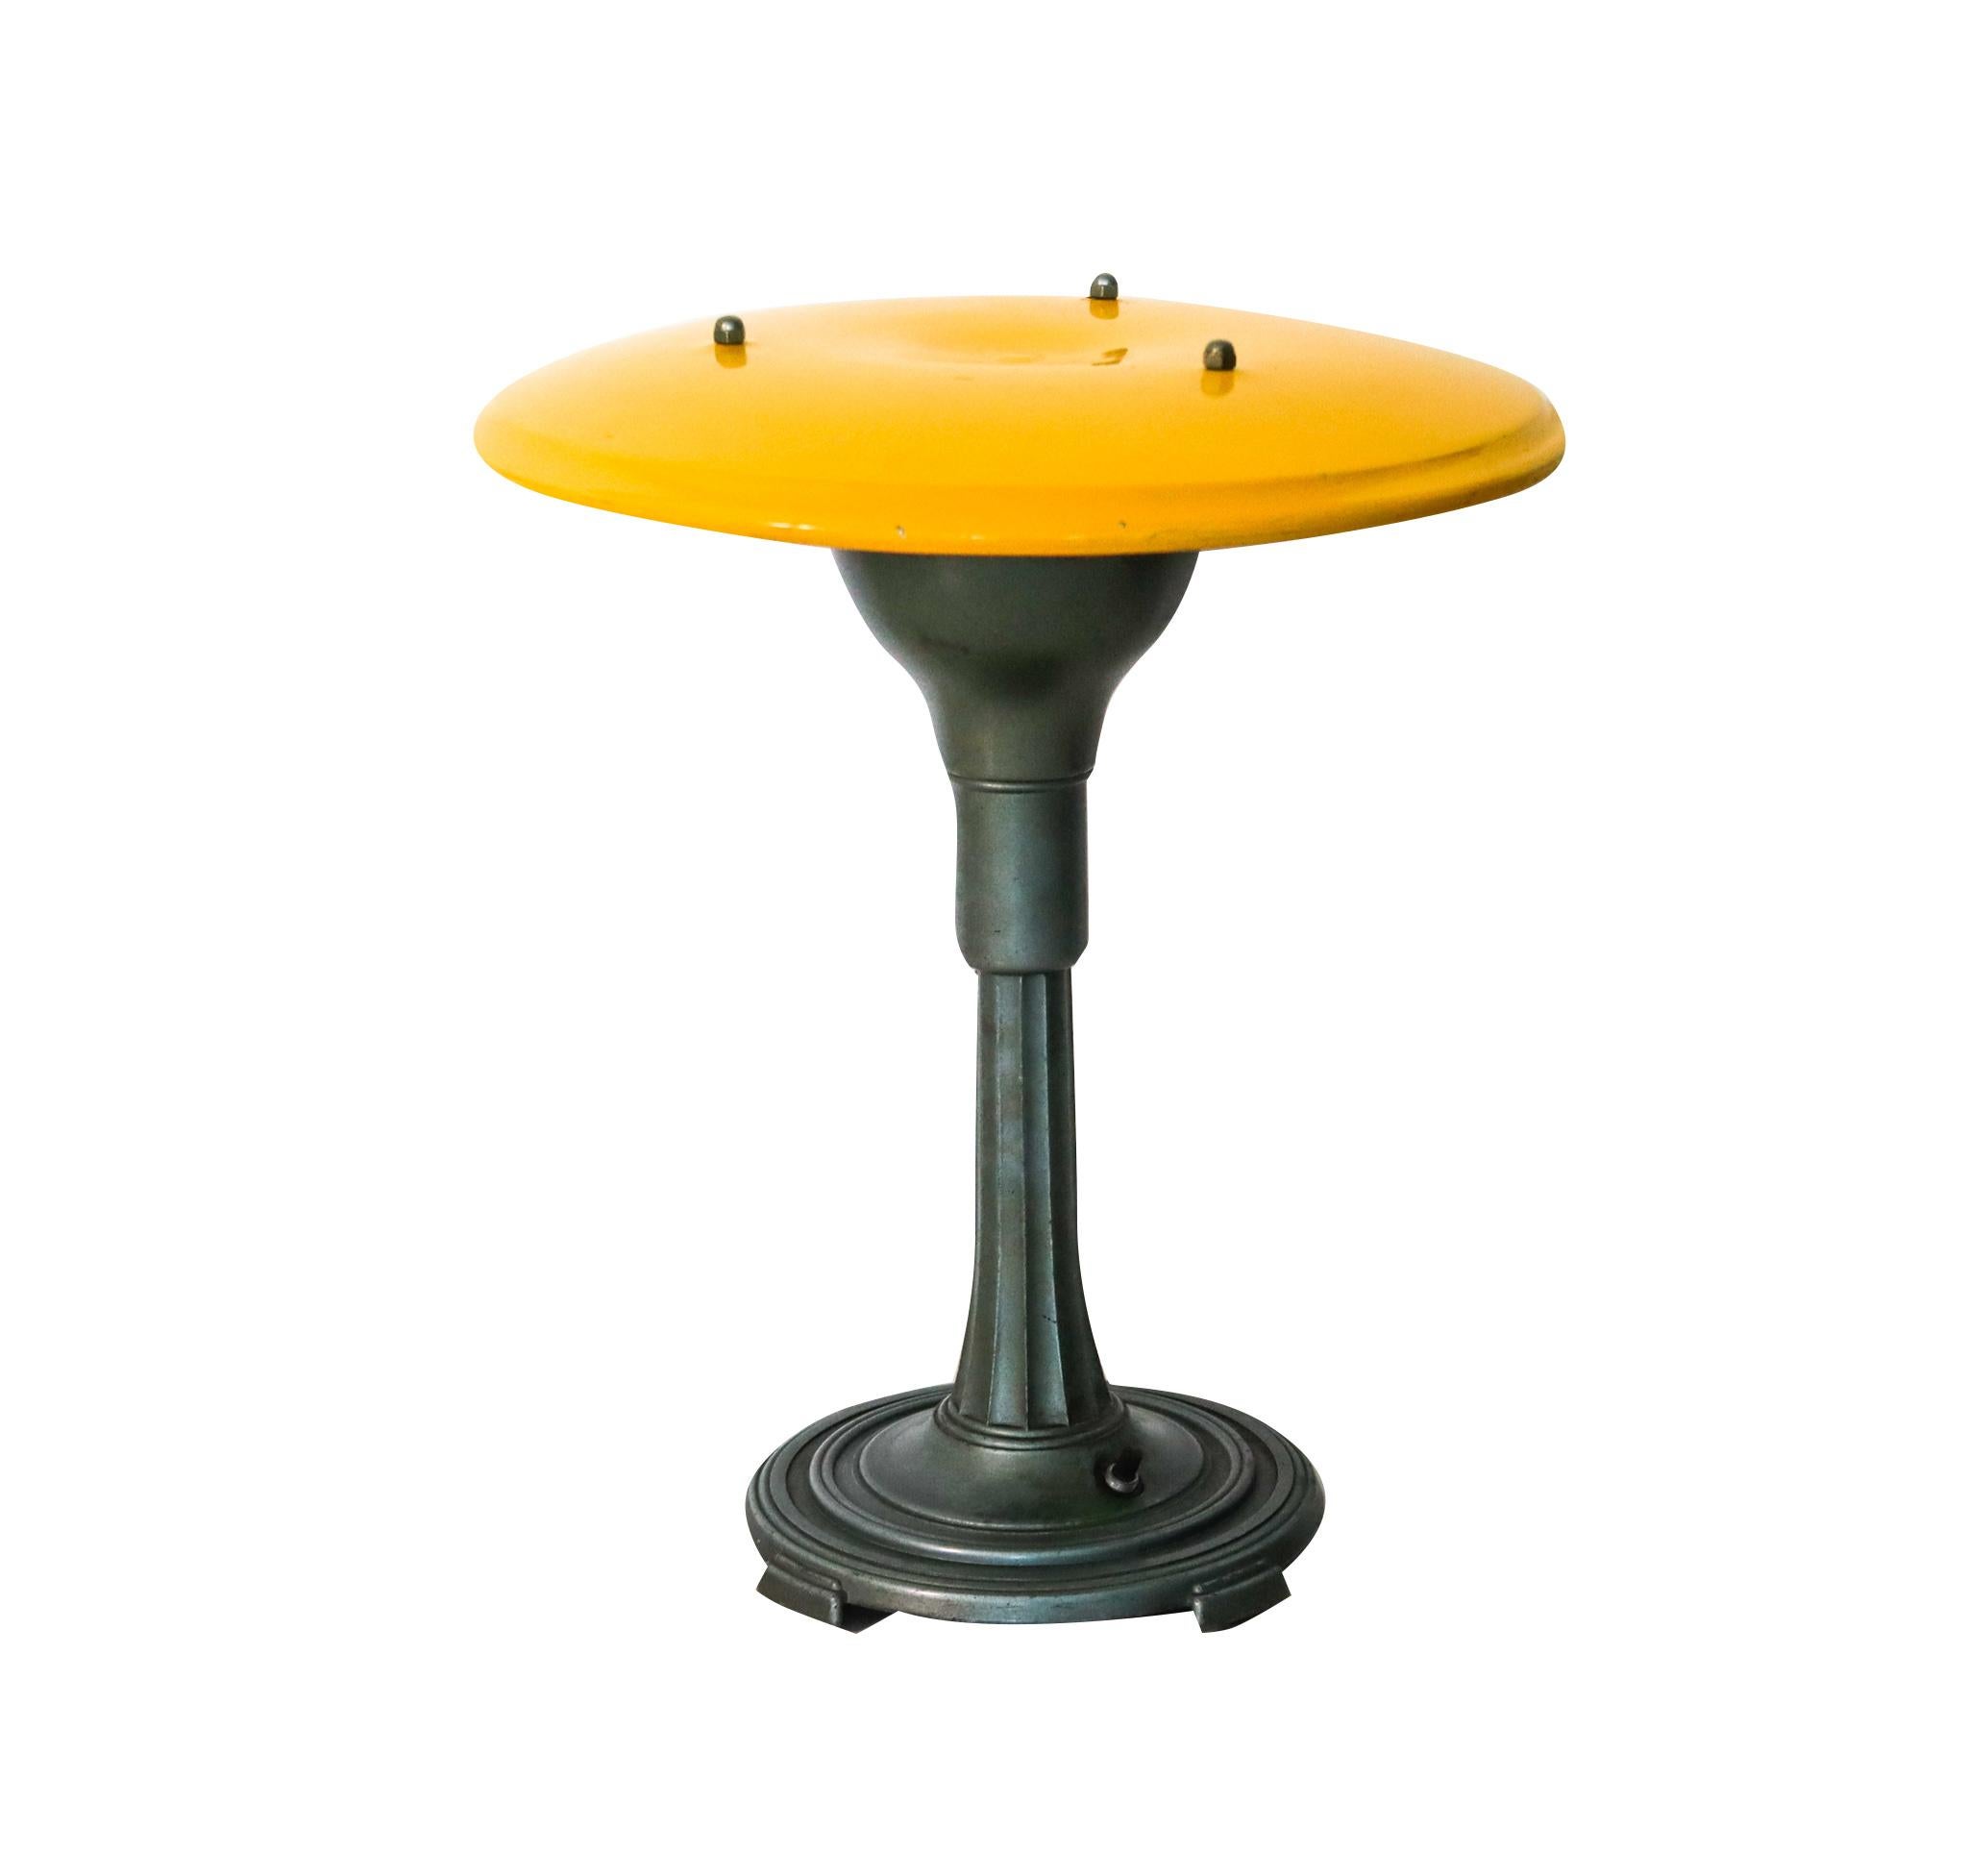 Lacquered Melville G. Willer 1930 Art Deco Metalware Table Lamp With Yellow Lacquer For Sale